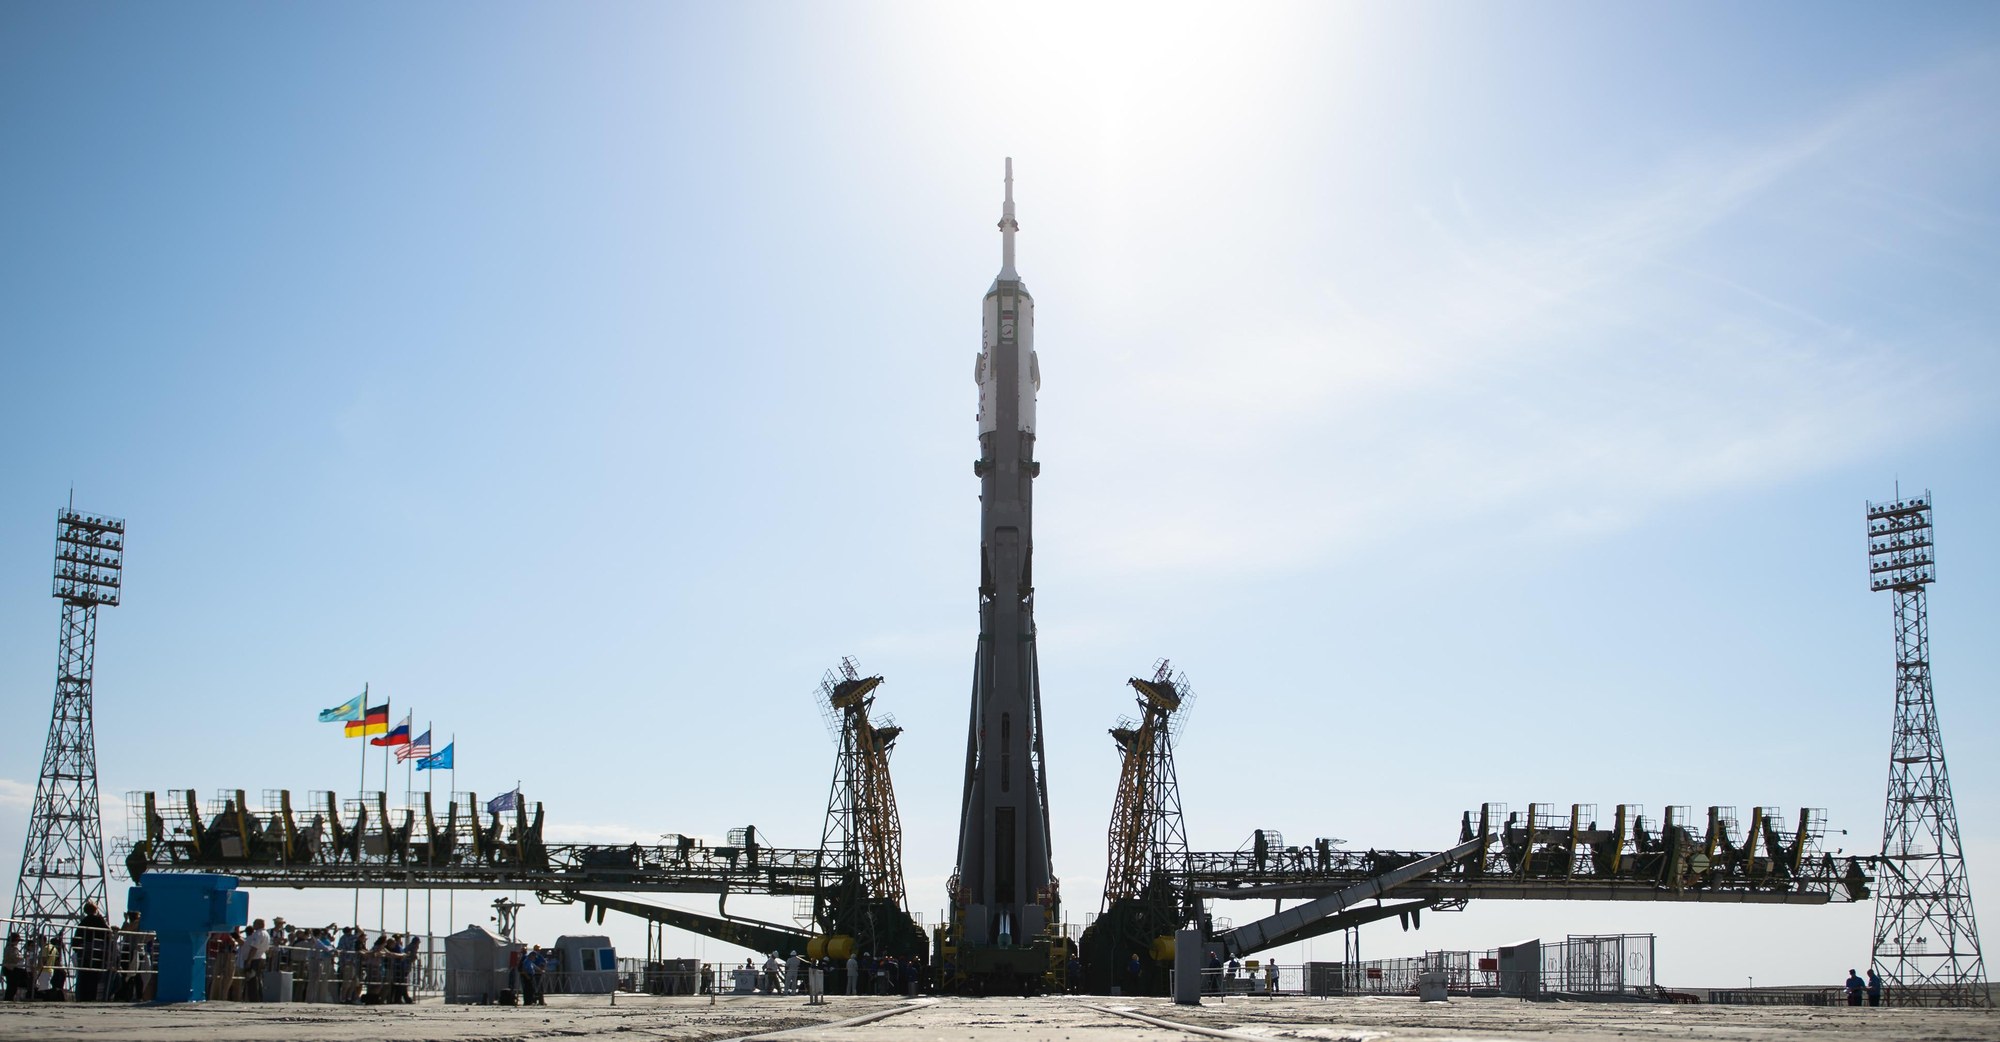 The Soyuz rocket on its launch pad